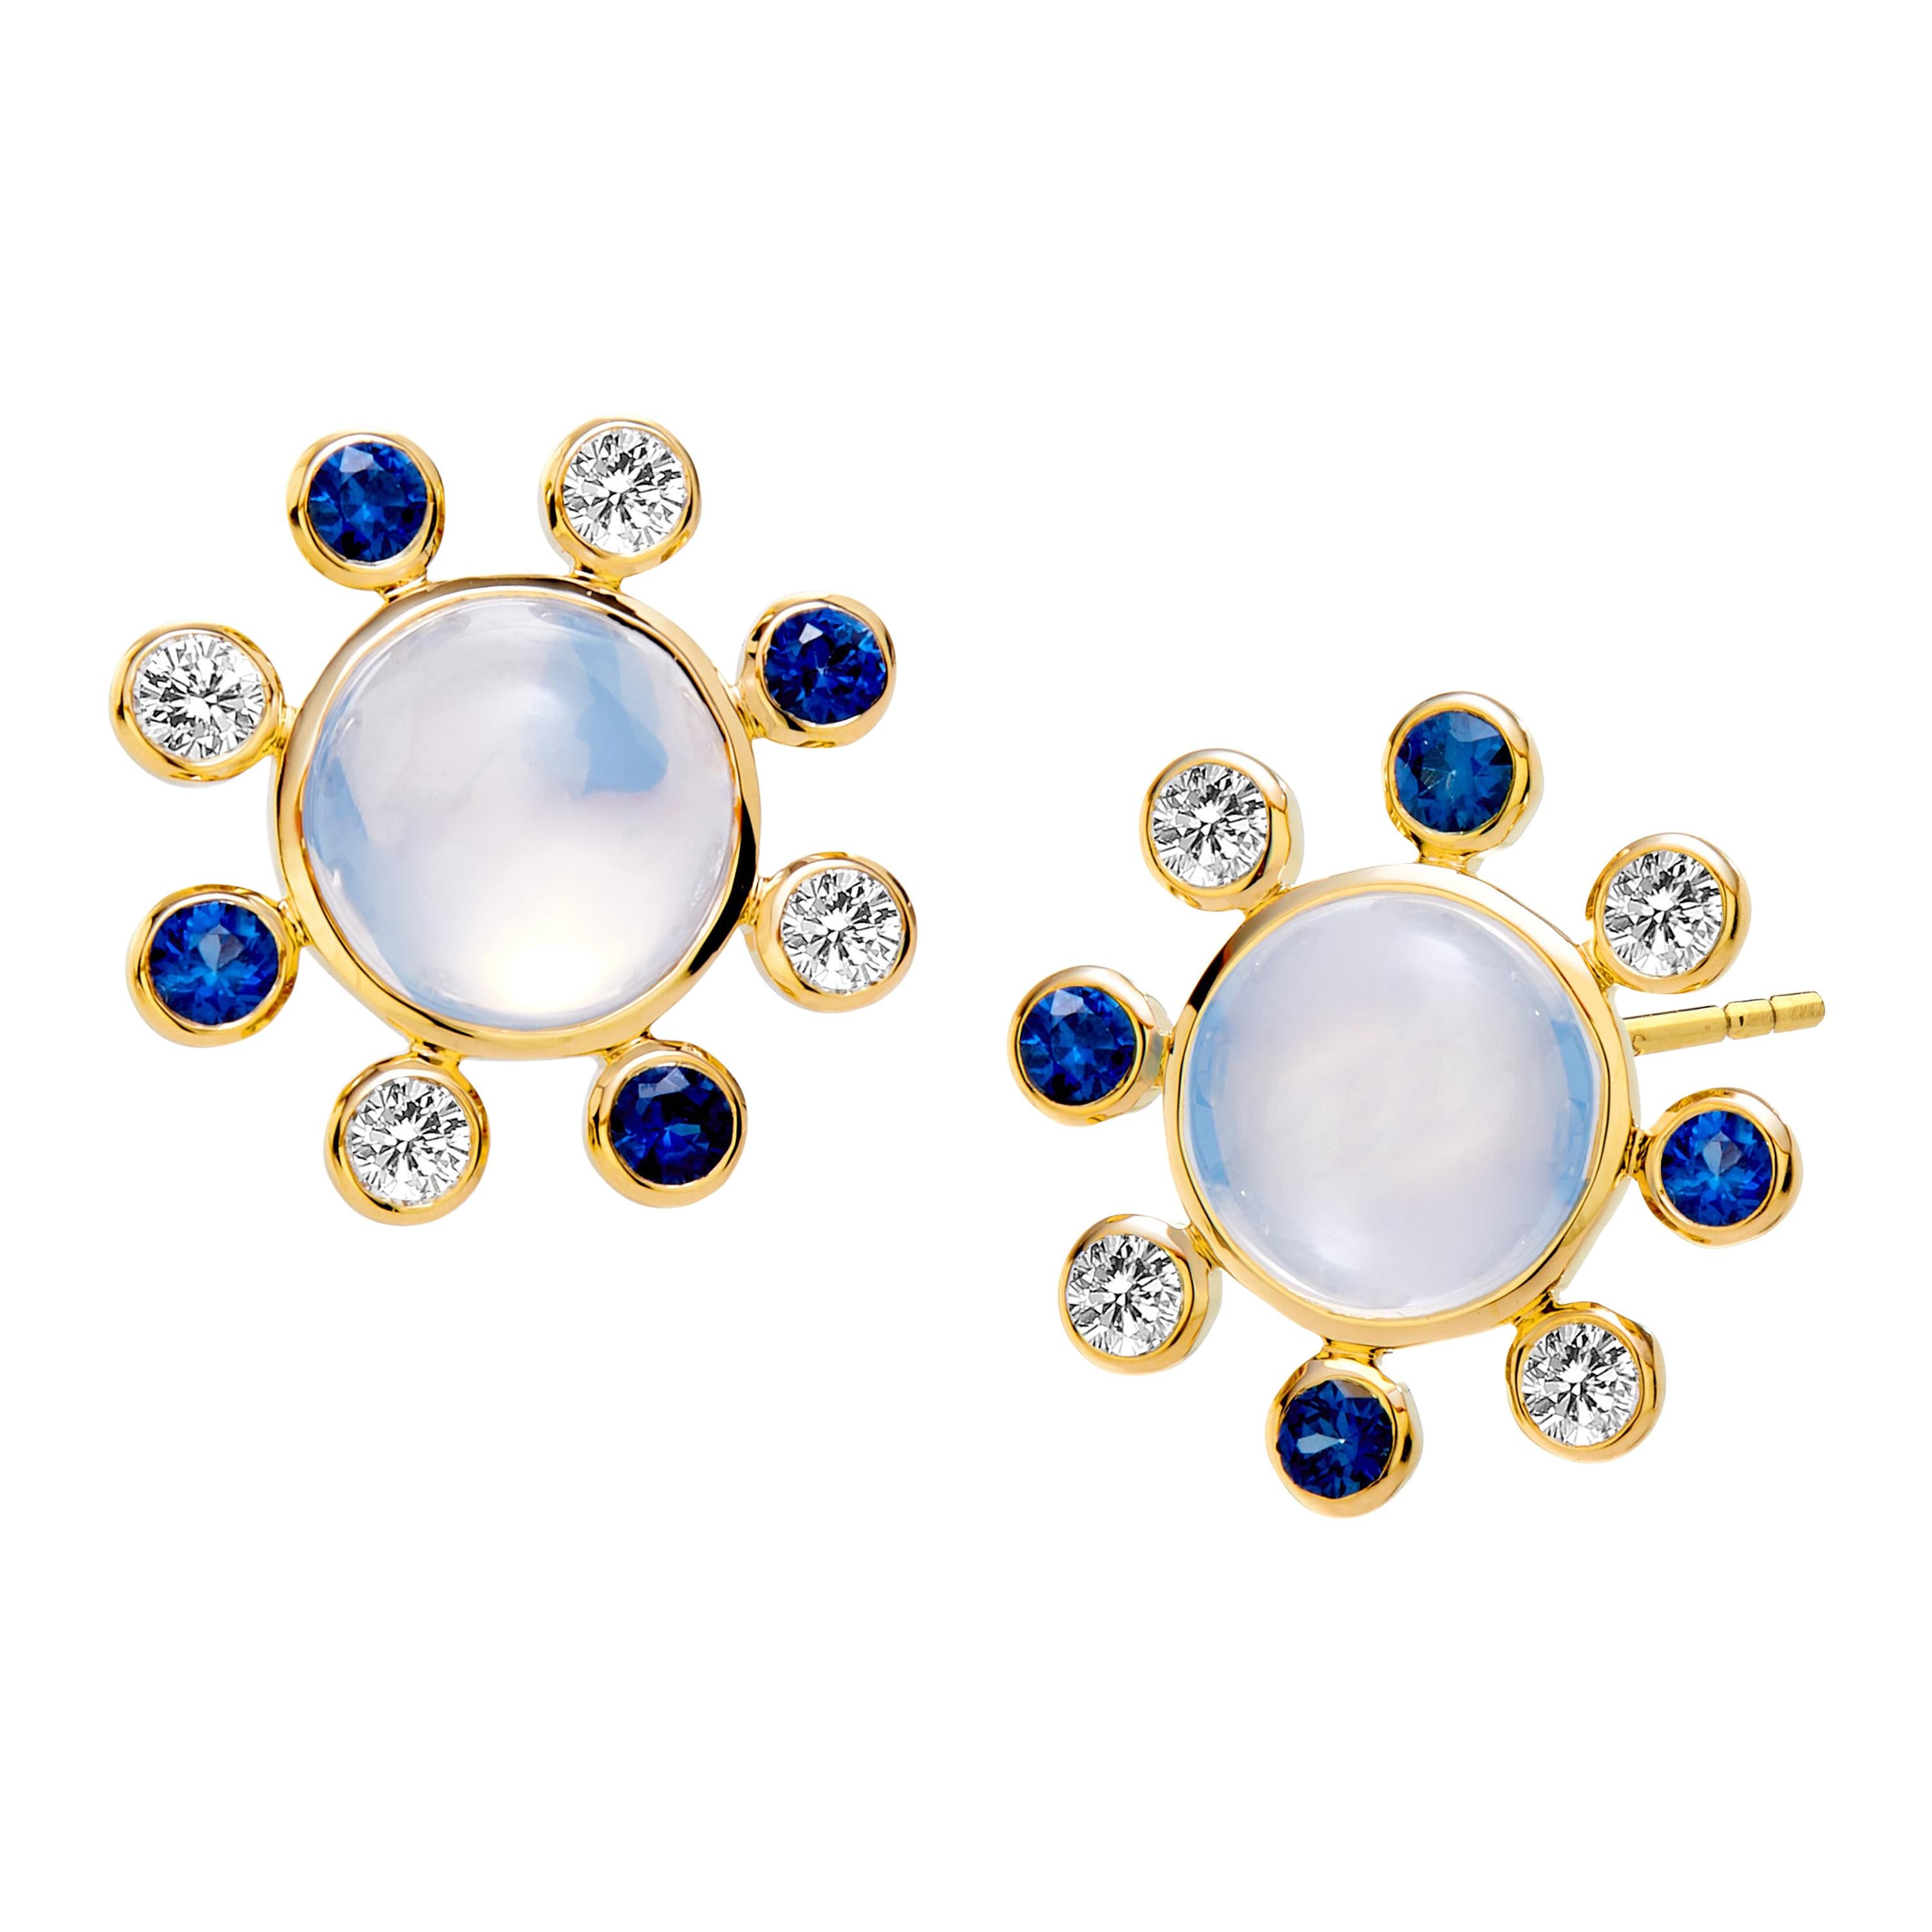 Syna Moon Quartz Yellow Gold Earrings with Sapphires and Diamonds